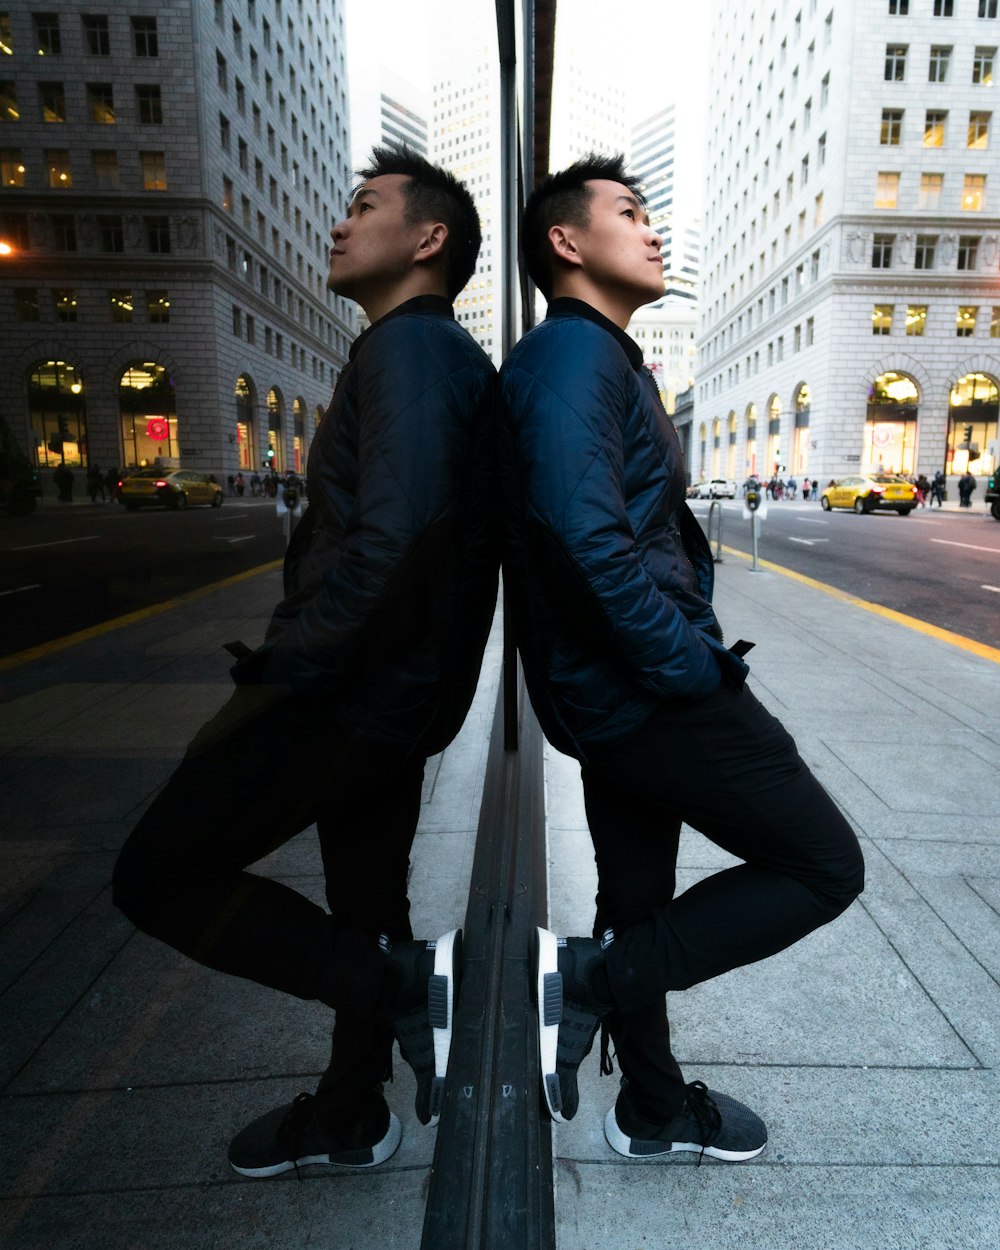 man leaning on mirrored wall wearing blue jacket